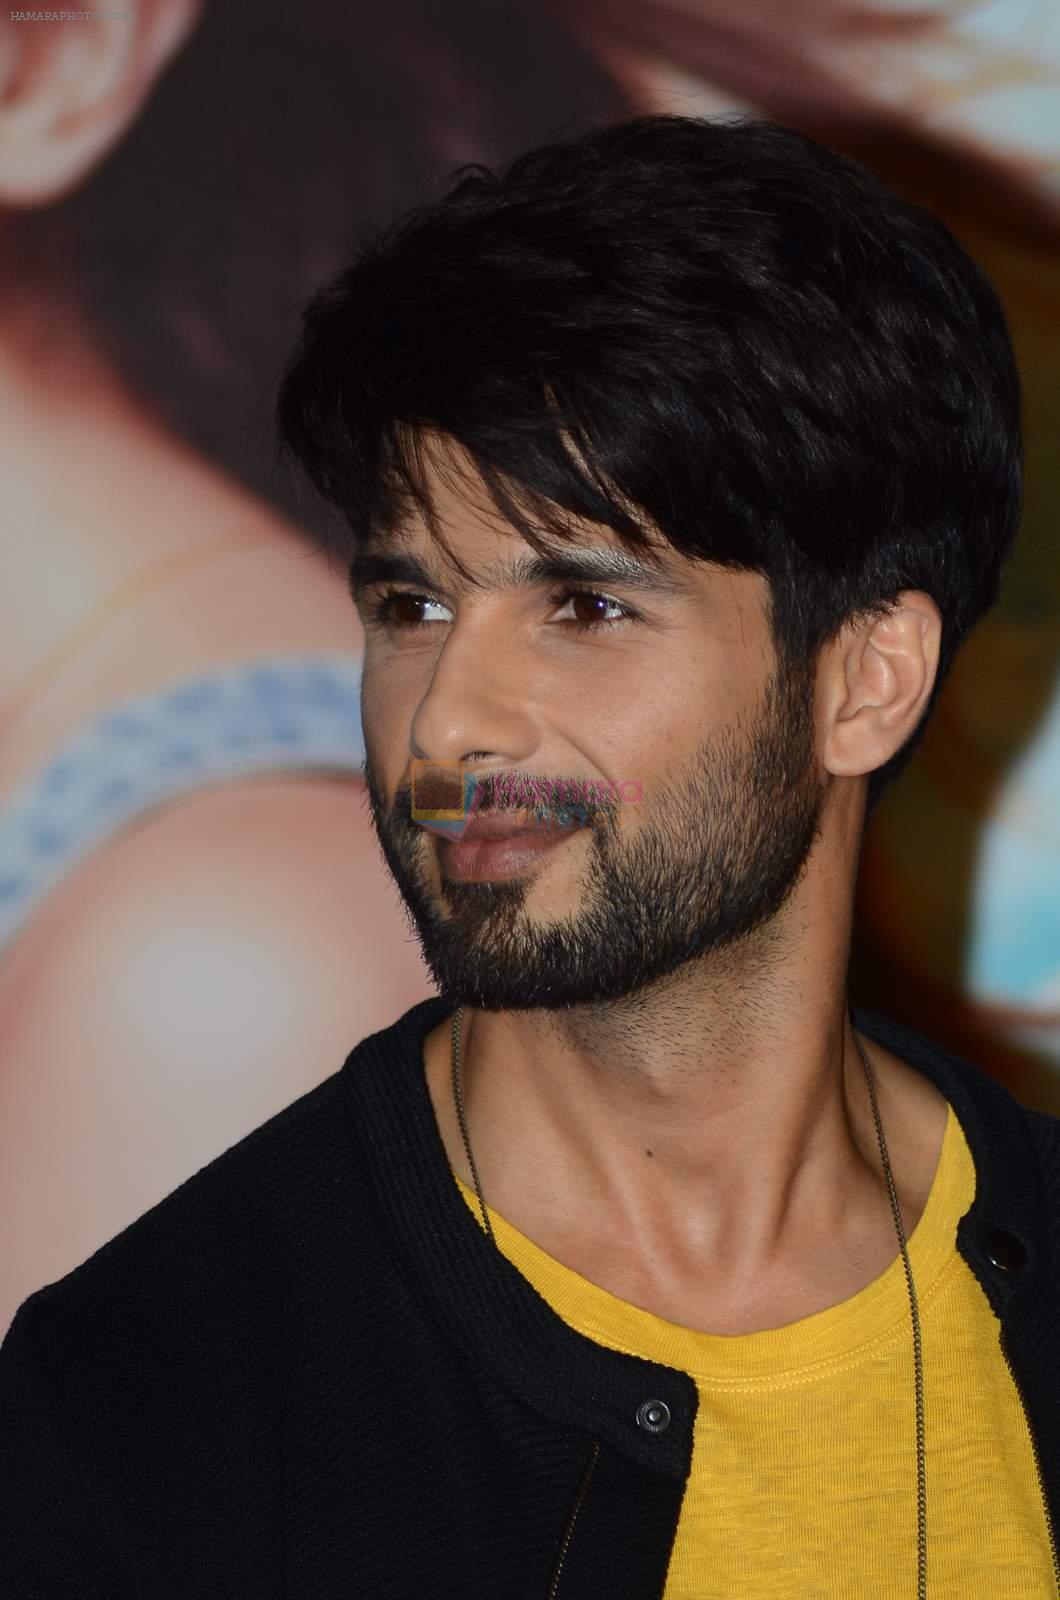 Shahid Kapoor at Trailer Launch of Shandaar in PVR on 11th Aug 2015